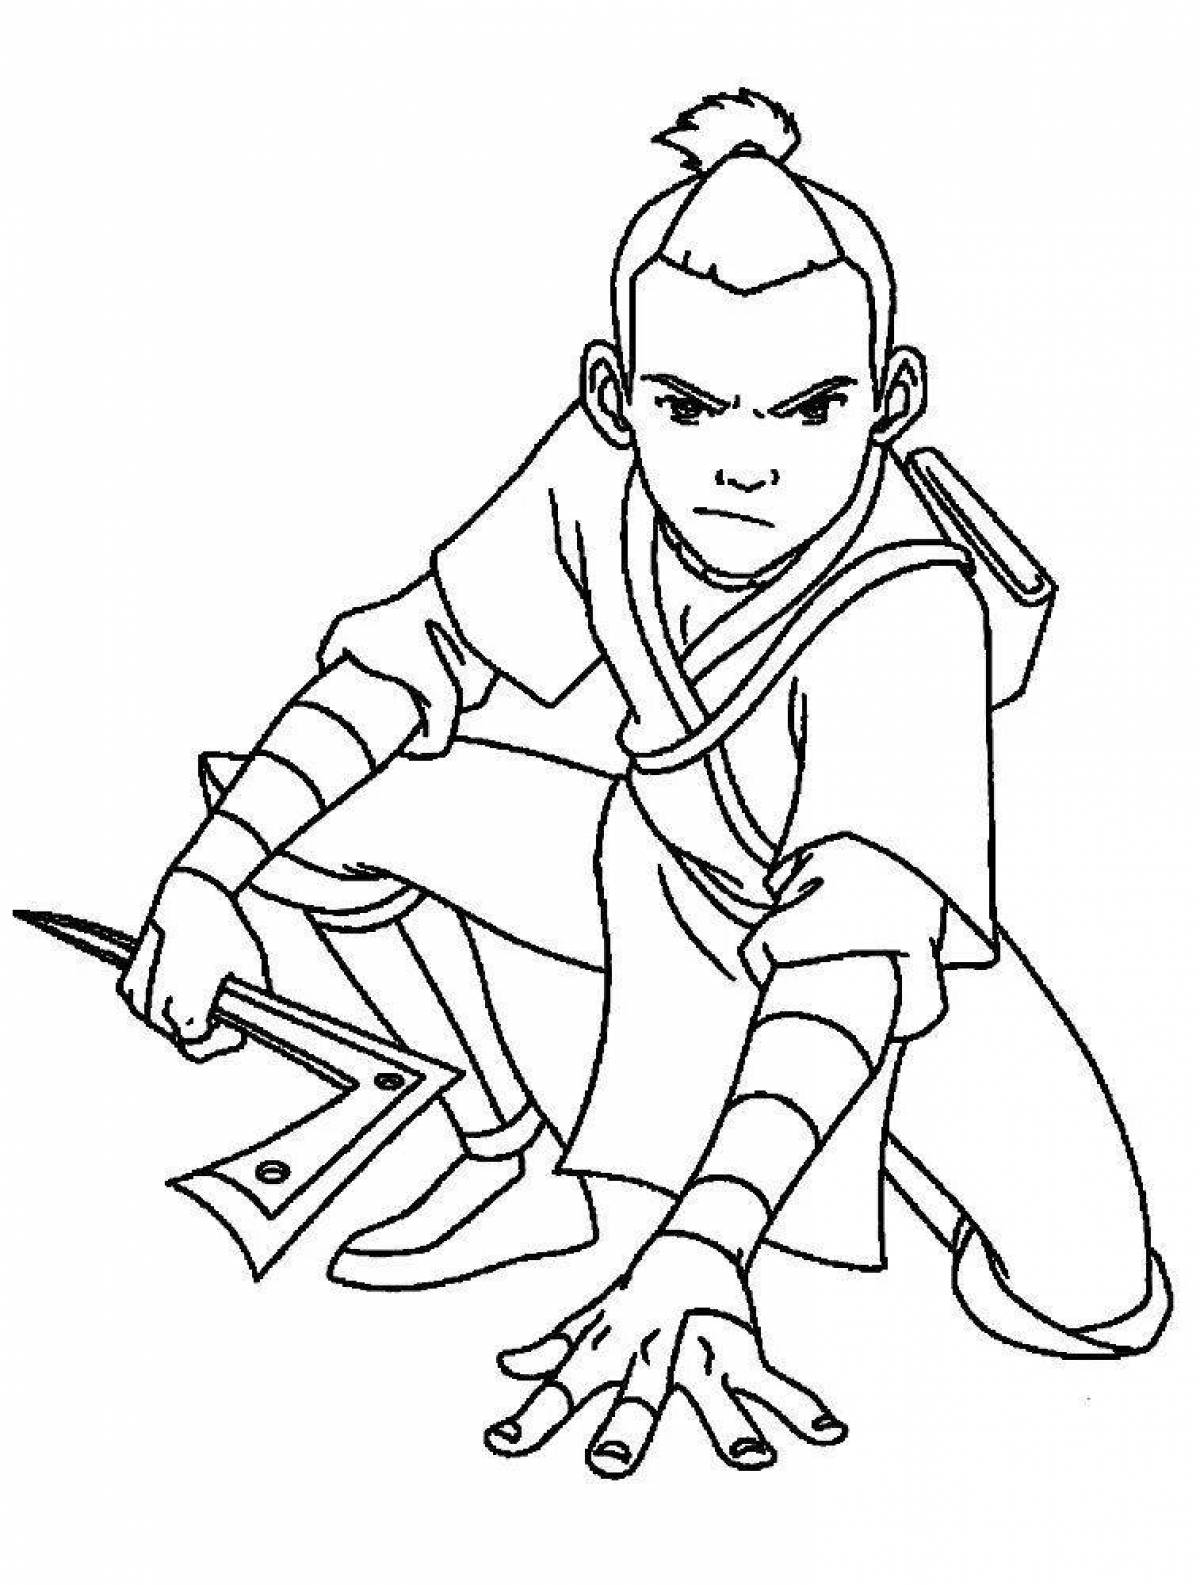 Aang's awesome avatar coloring page